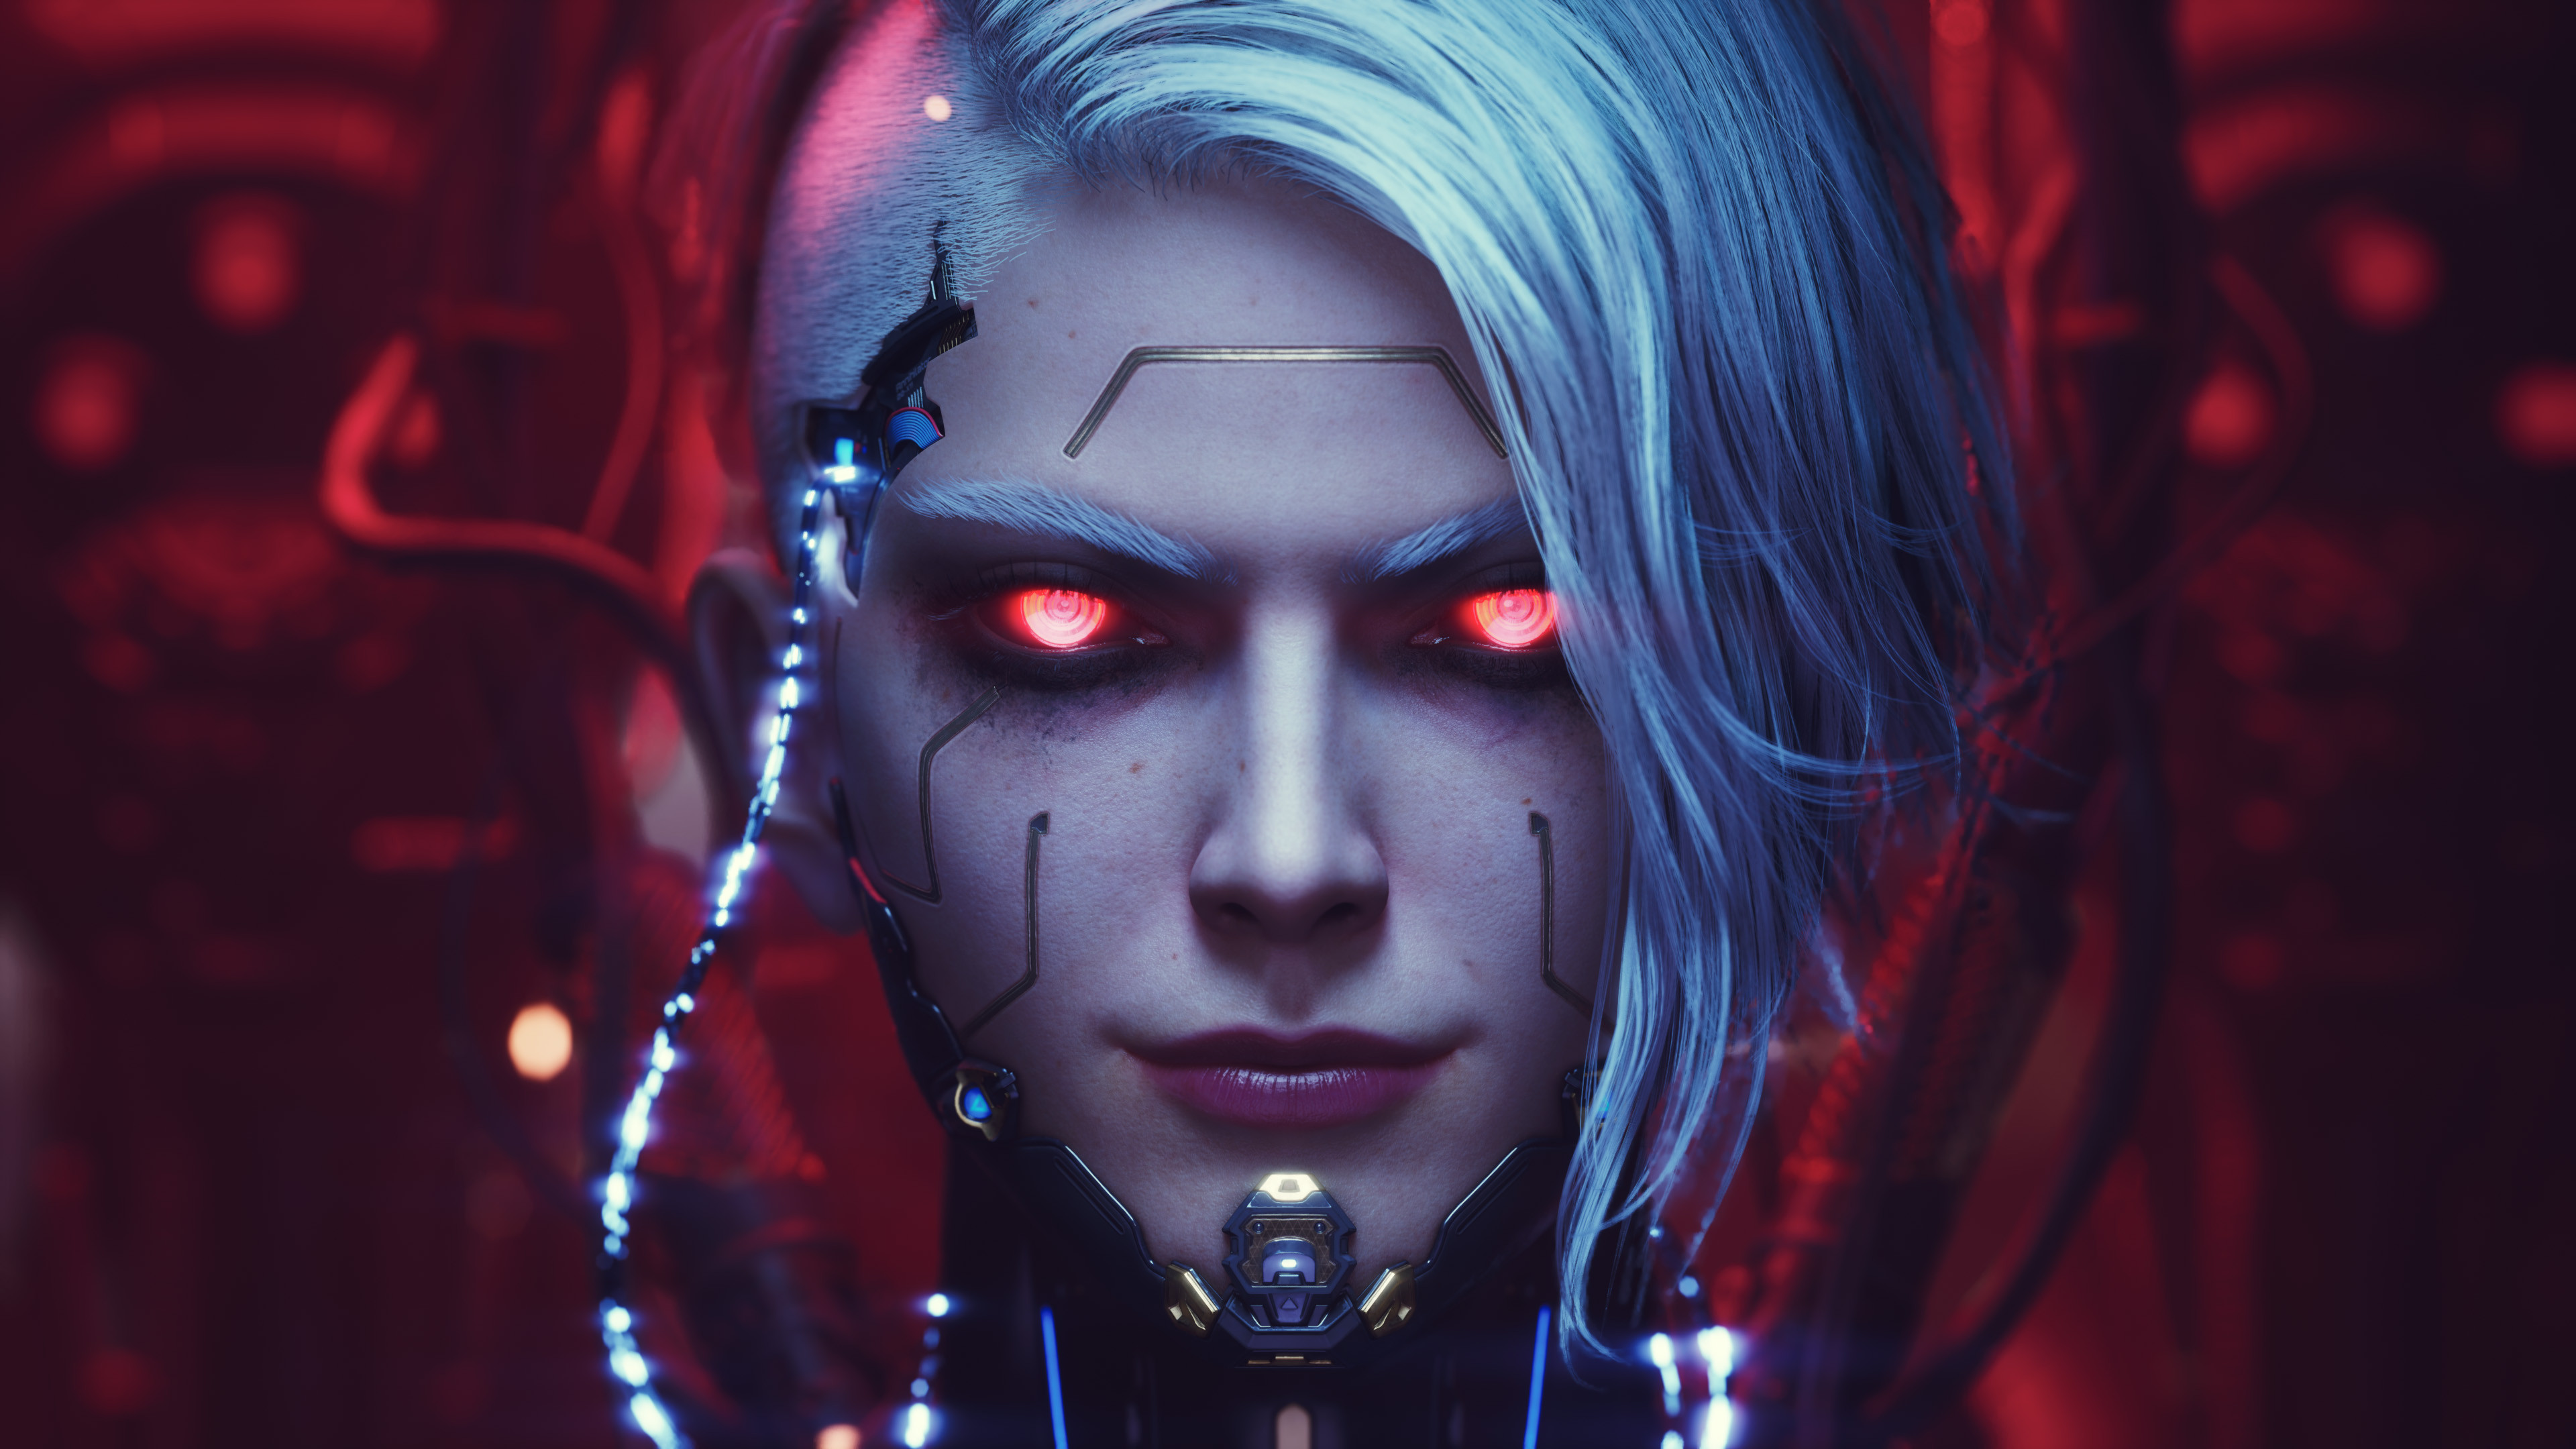 General 3840x2160 Huifeng Huang CGI cyberpunk portrait wires red eyes closeup digital art face looking at viewer frontal view closed mouth blurry background cables futuristic short hair cyborg smiling silver hair cyborg girl glowing eyes